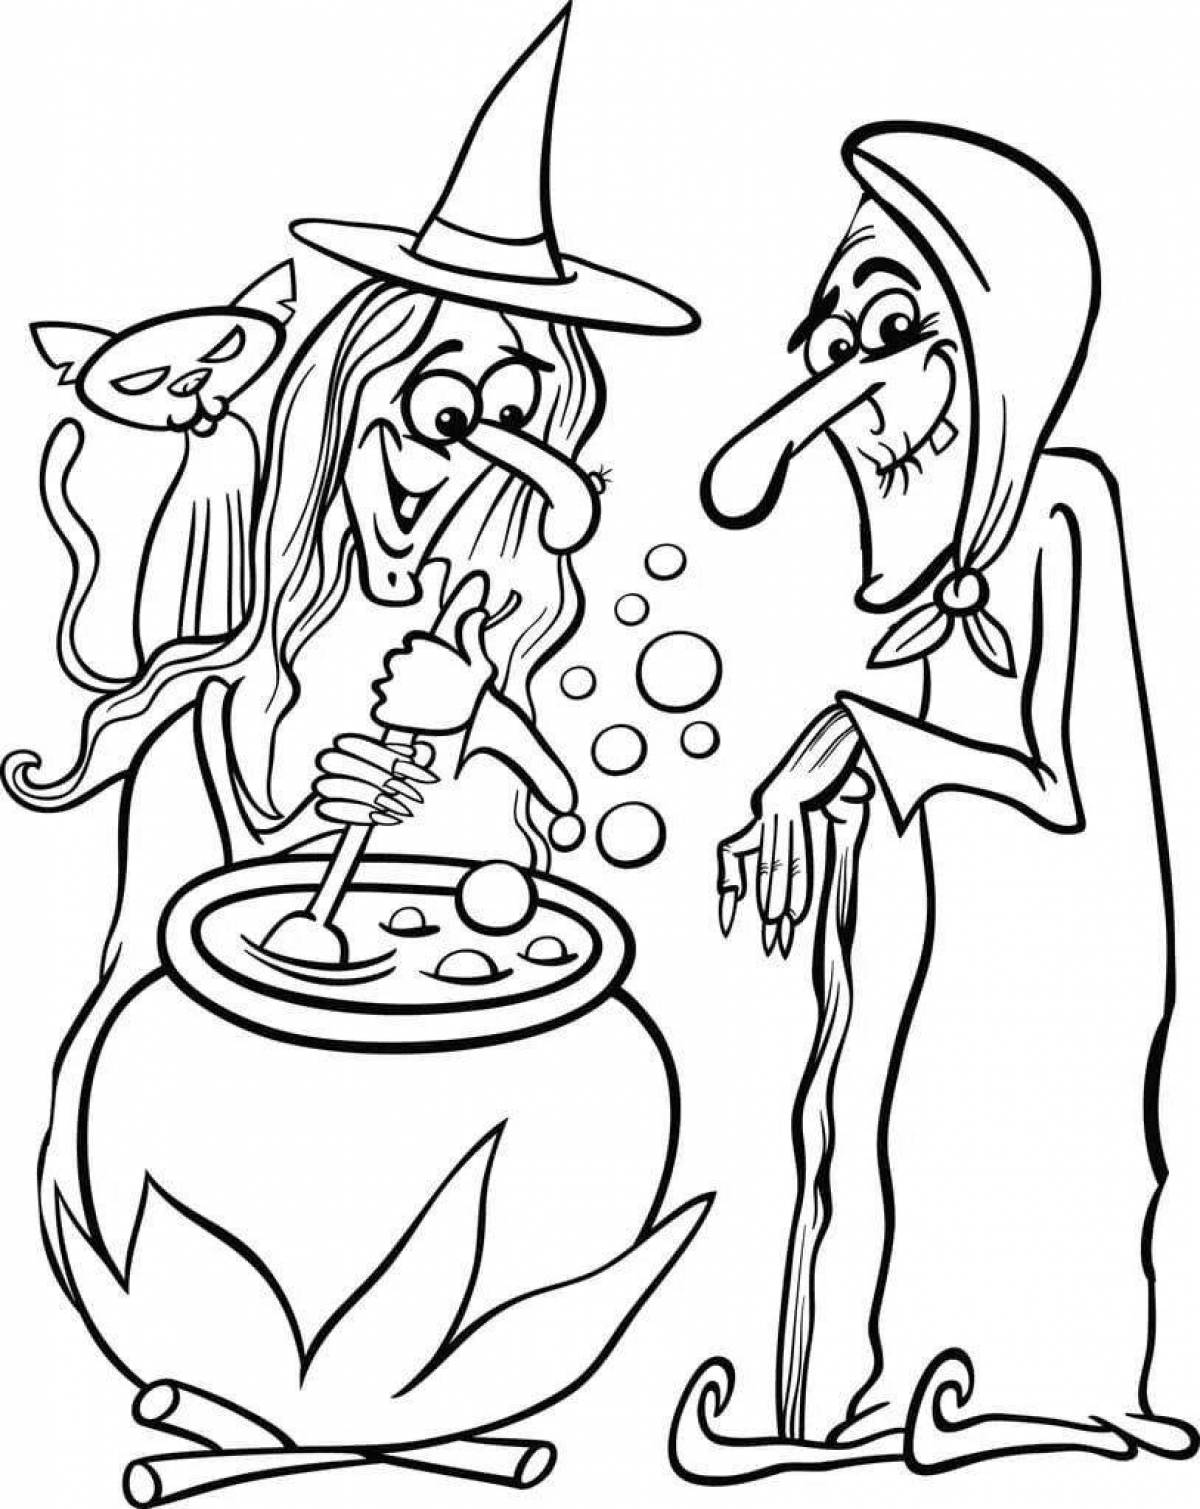 Coloring book funny little witch